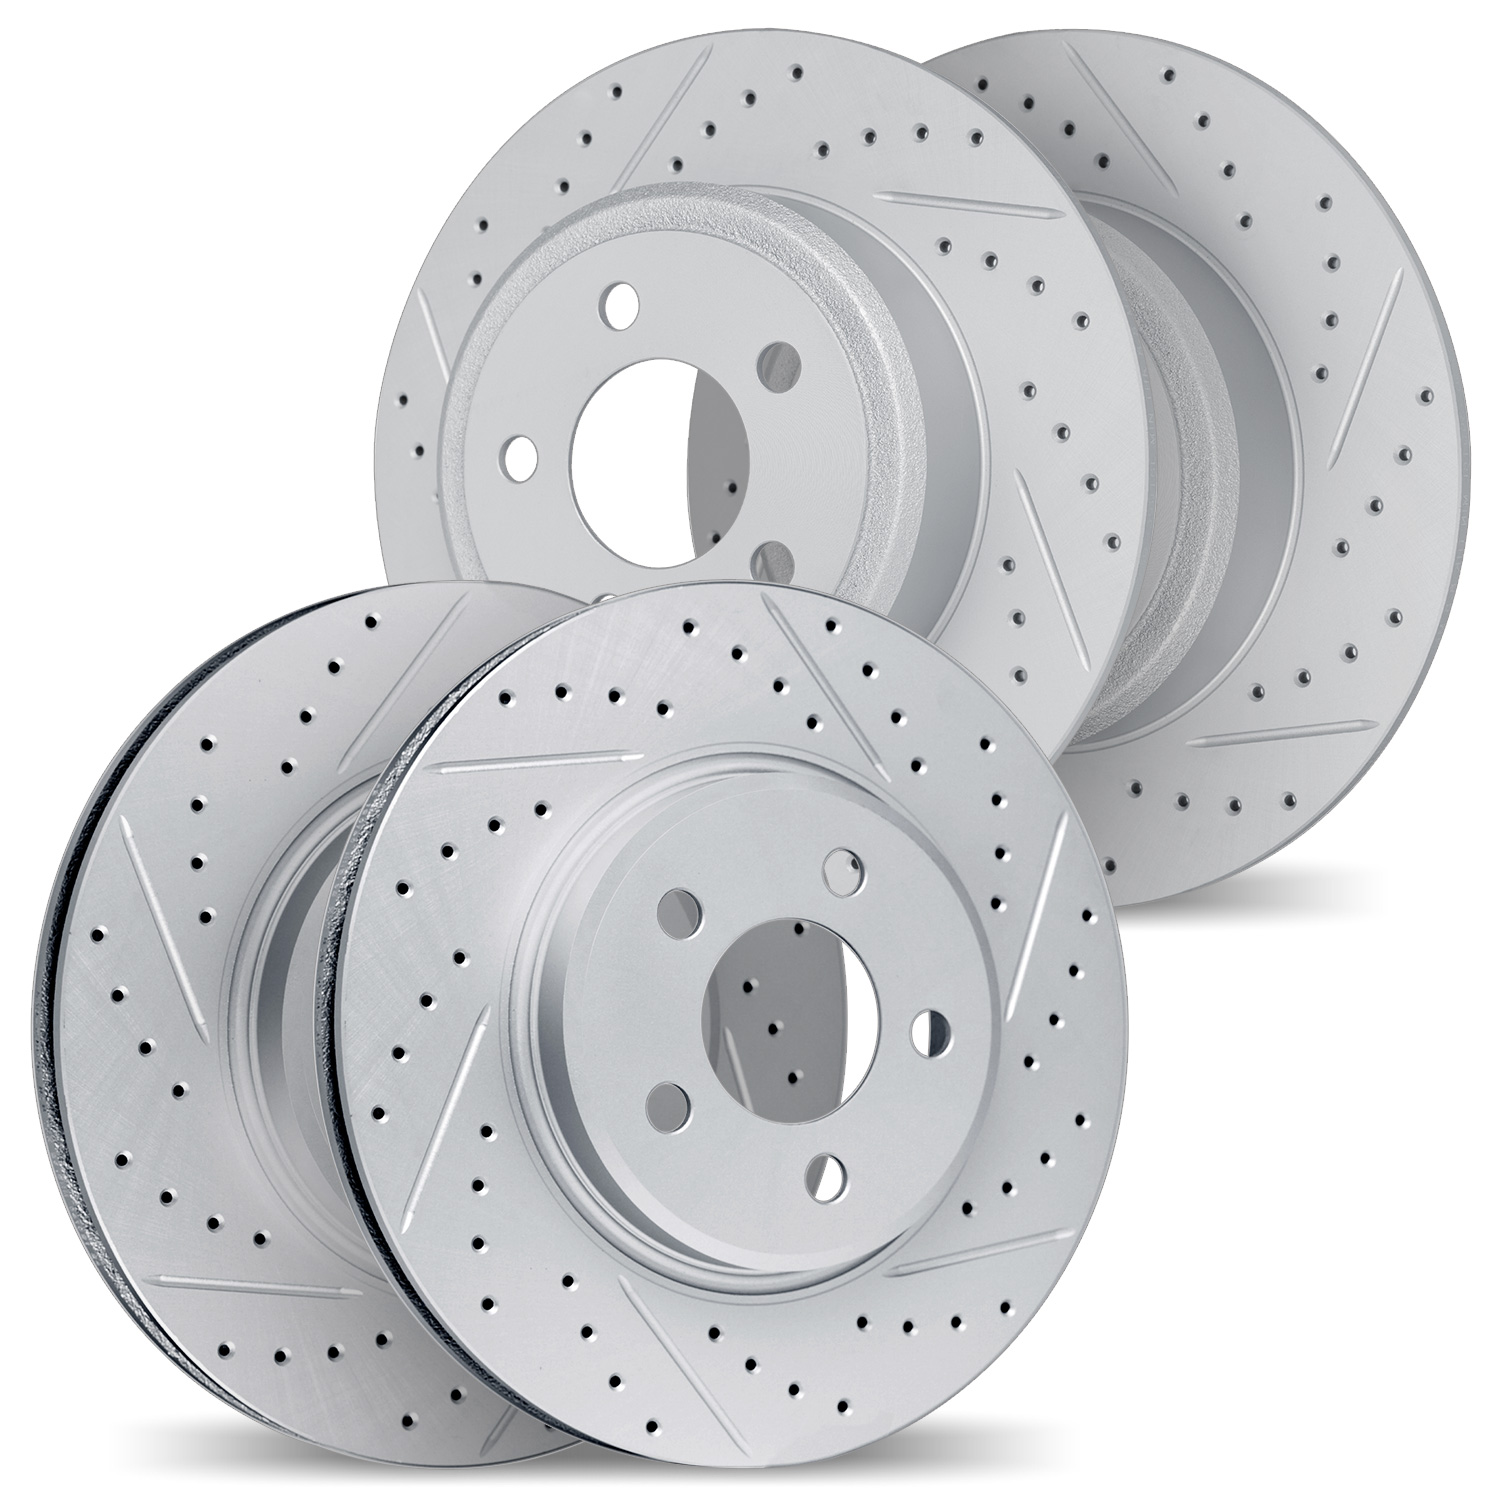 2004-42011 Geoperformance Drilled/Slotted Brake Rotors, Fits Select Mopar, Position: Front and Rear